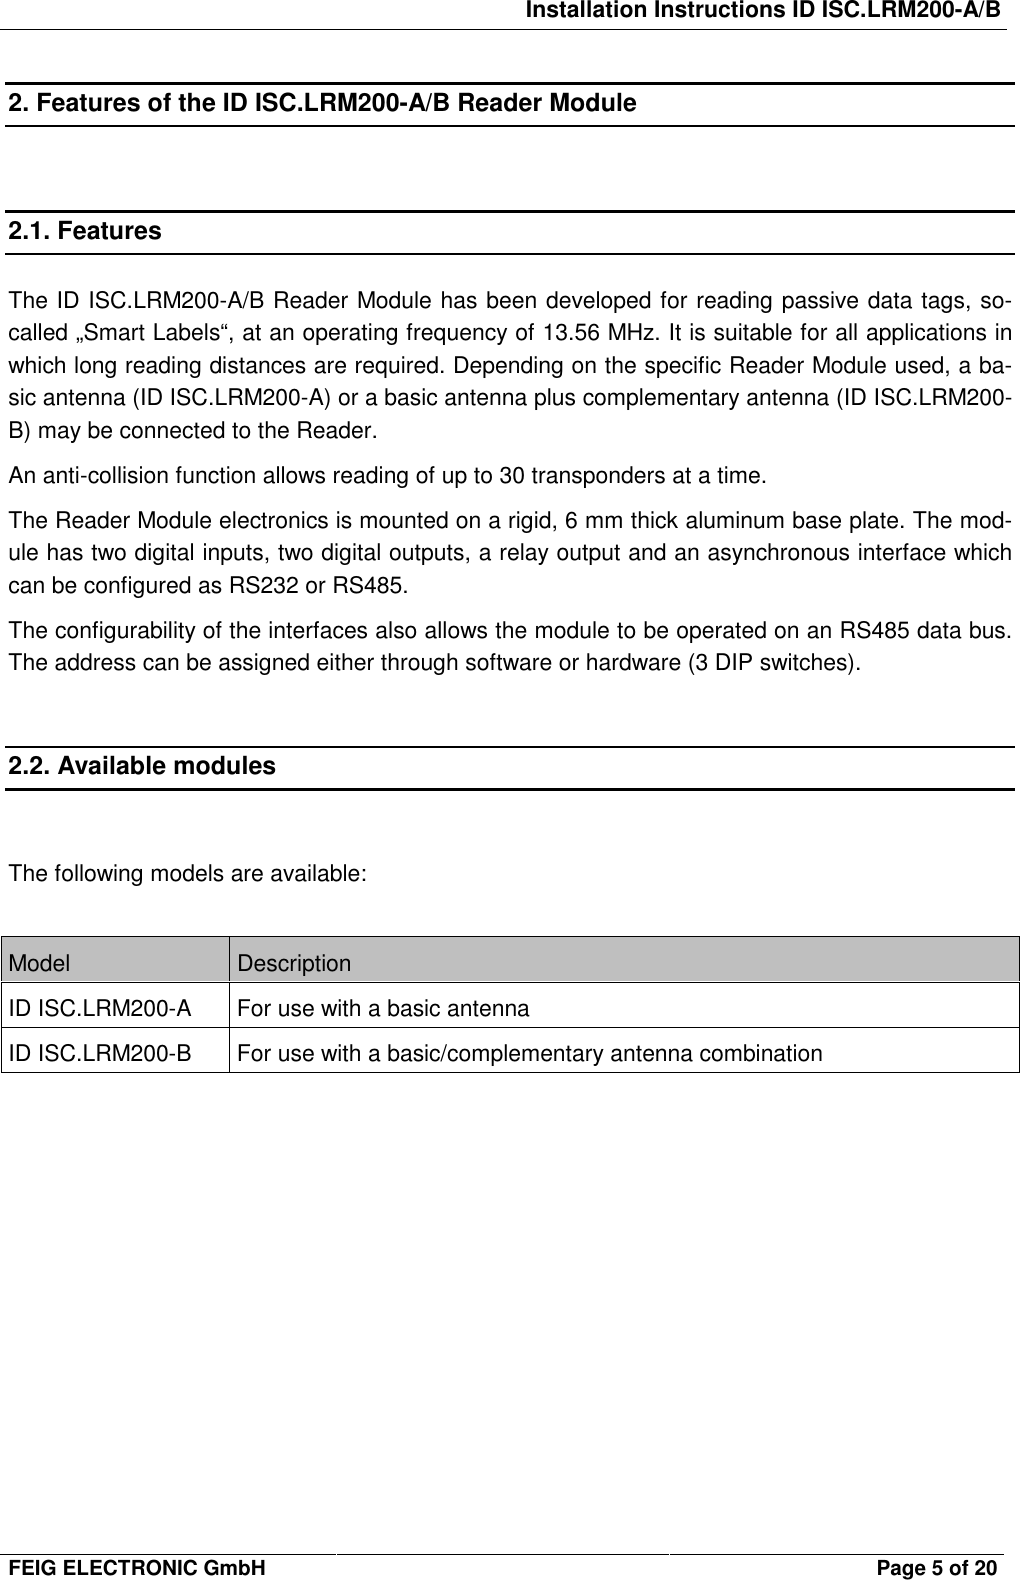 Installation Instructions ID ISC.LRM200-A/BFEIG ELECTRONIC GmbH Page 5 of 202. Features of the ID ISC.LRM200-A/B Reader Module2.1. FeaturesThe ID ISC.LRM200-A/B Reader Module has been developed for reading passive data tags, so-called „Smart Labels“, at an operating frequency of 13.56 MHz. It is suitable for all applications inwhich long reading distances are required. Depending on the specific Reader Module used, a ba-sic antenna (ID ISC.LRM200-A) or a basic antenna plus complementary antenna (ID ISC.LRM200-B) may be connected to the Reader.An anti-collision function allows reading of up to 30 transponders at a time.The Reader Module electronics is mounted on a rigid, 6 mm thick aluminum base plate. The mod-ule has two digital inputs, two digital outputs, a relay output and an asynchronous interface whichcan be configured as RS232 or RS485.The configurability of the interfaces also allows the module to be operated on an RS485 data bus.The address can be assigned either through software or hardware (3 DIP switches).2.2. Available modulesThe following models are available:Model DescriptionID ISC.LRM200-A For use with a basic antennaID ISC.LRM200-B For use with a basic/complementary antenna combination